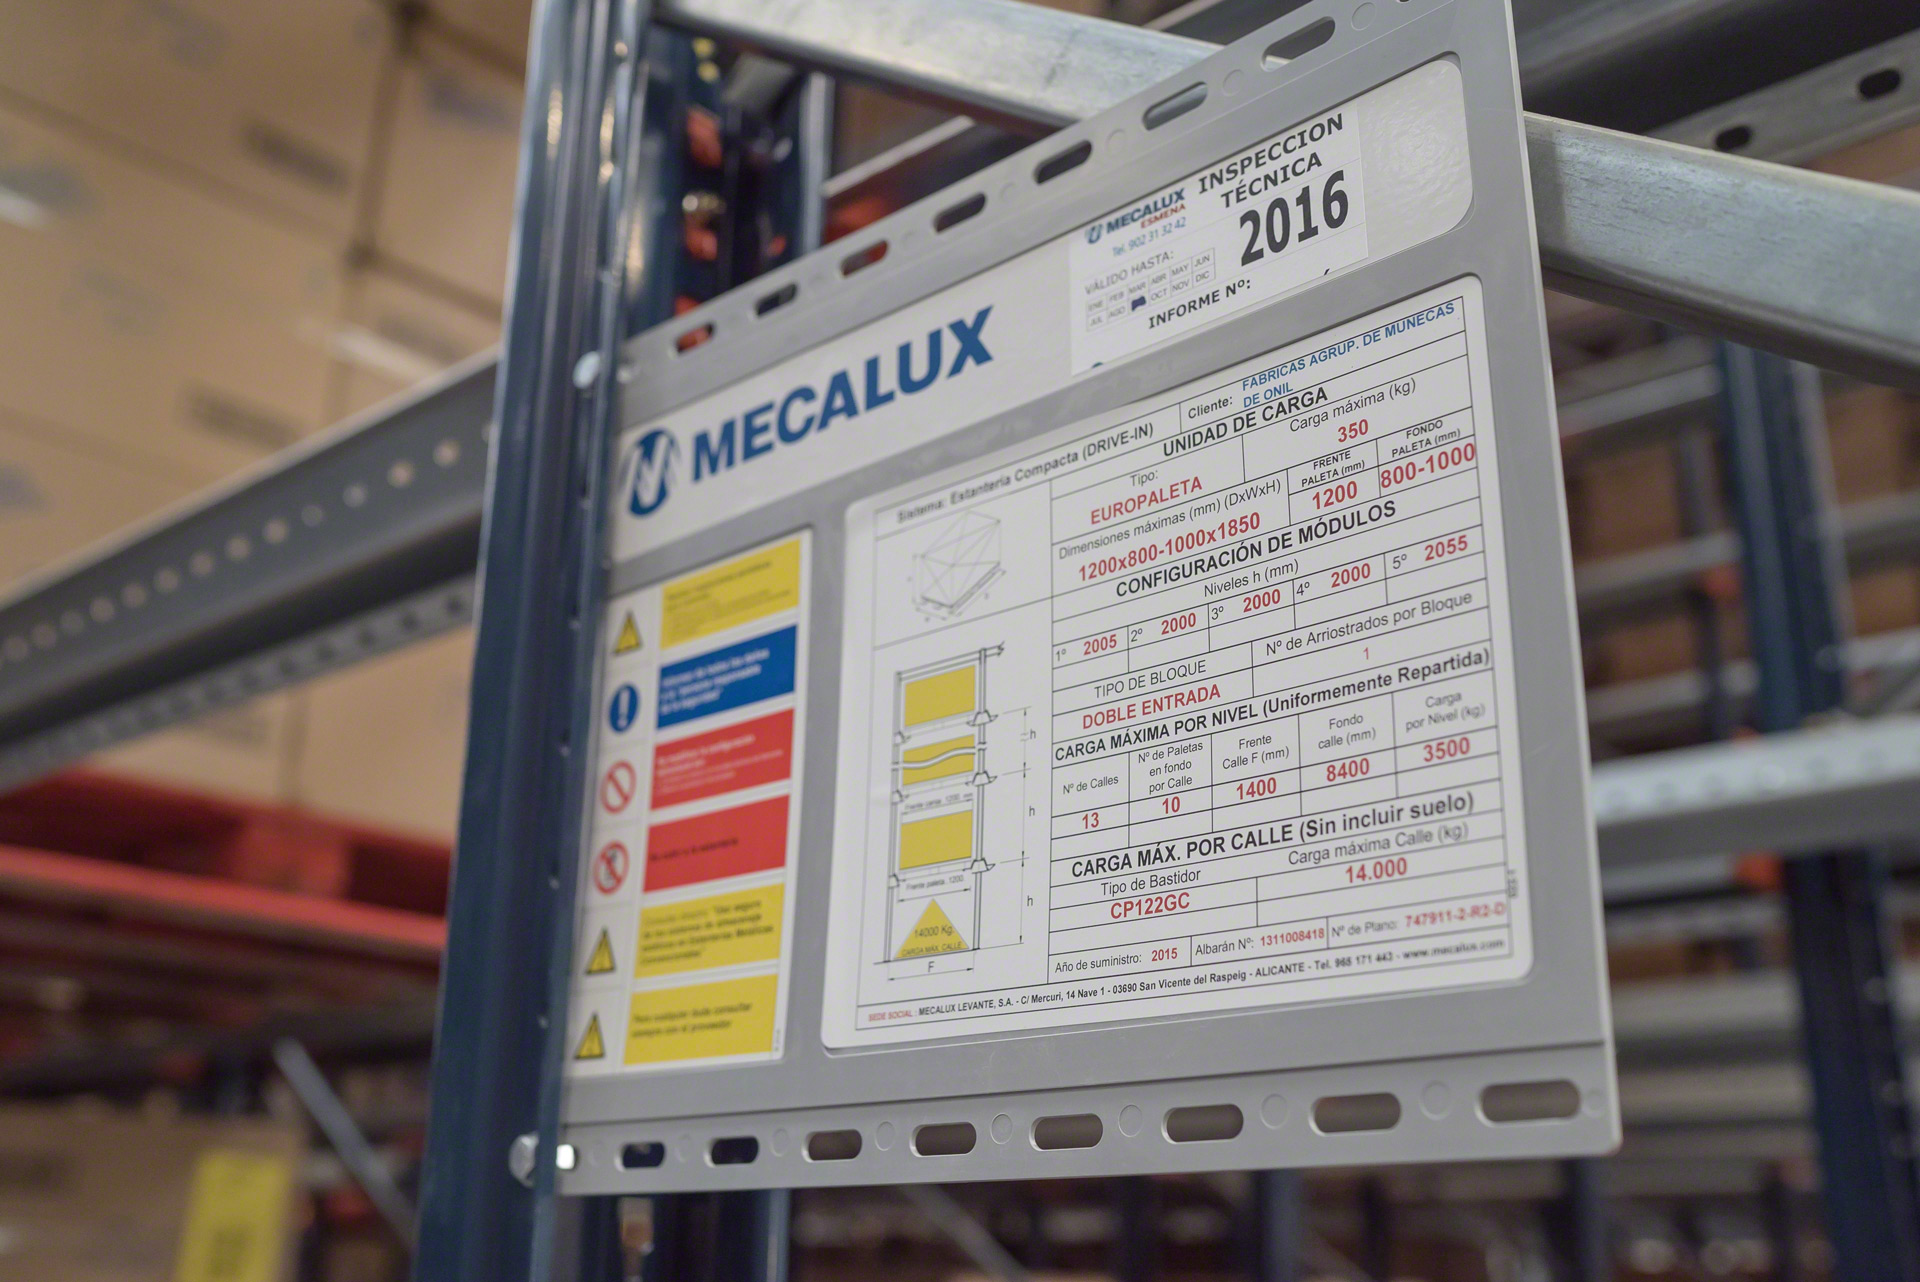 The signage plates, placed in visible areas of the drive-in pallet racking system, detail the technical characteristics of the racking